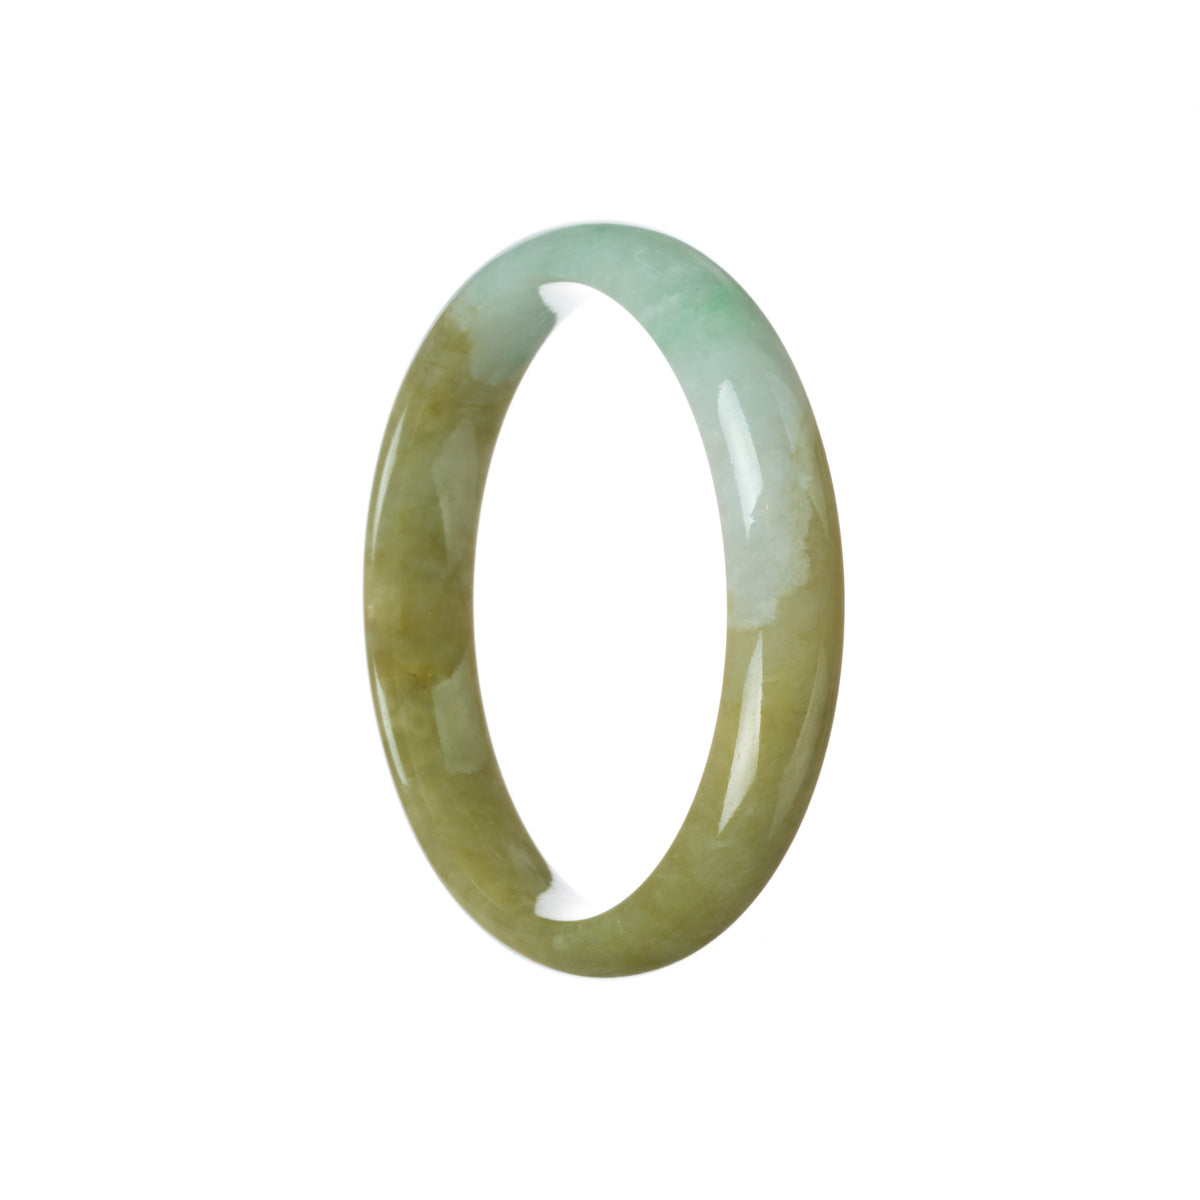 A close-up of a stunning Burmese Jade bracelet in a half-moon shape, showcasing its beautiful gradation of brownish green and apple green colors.